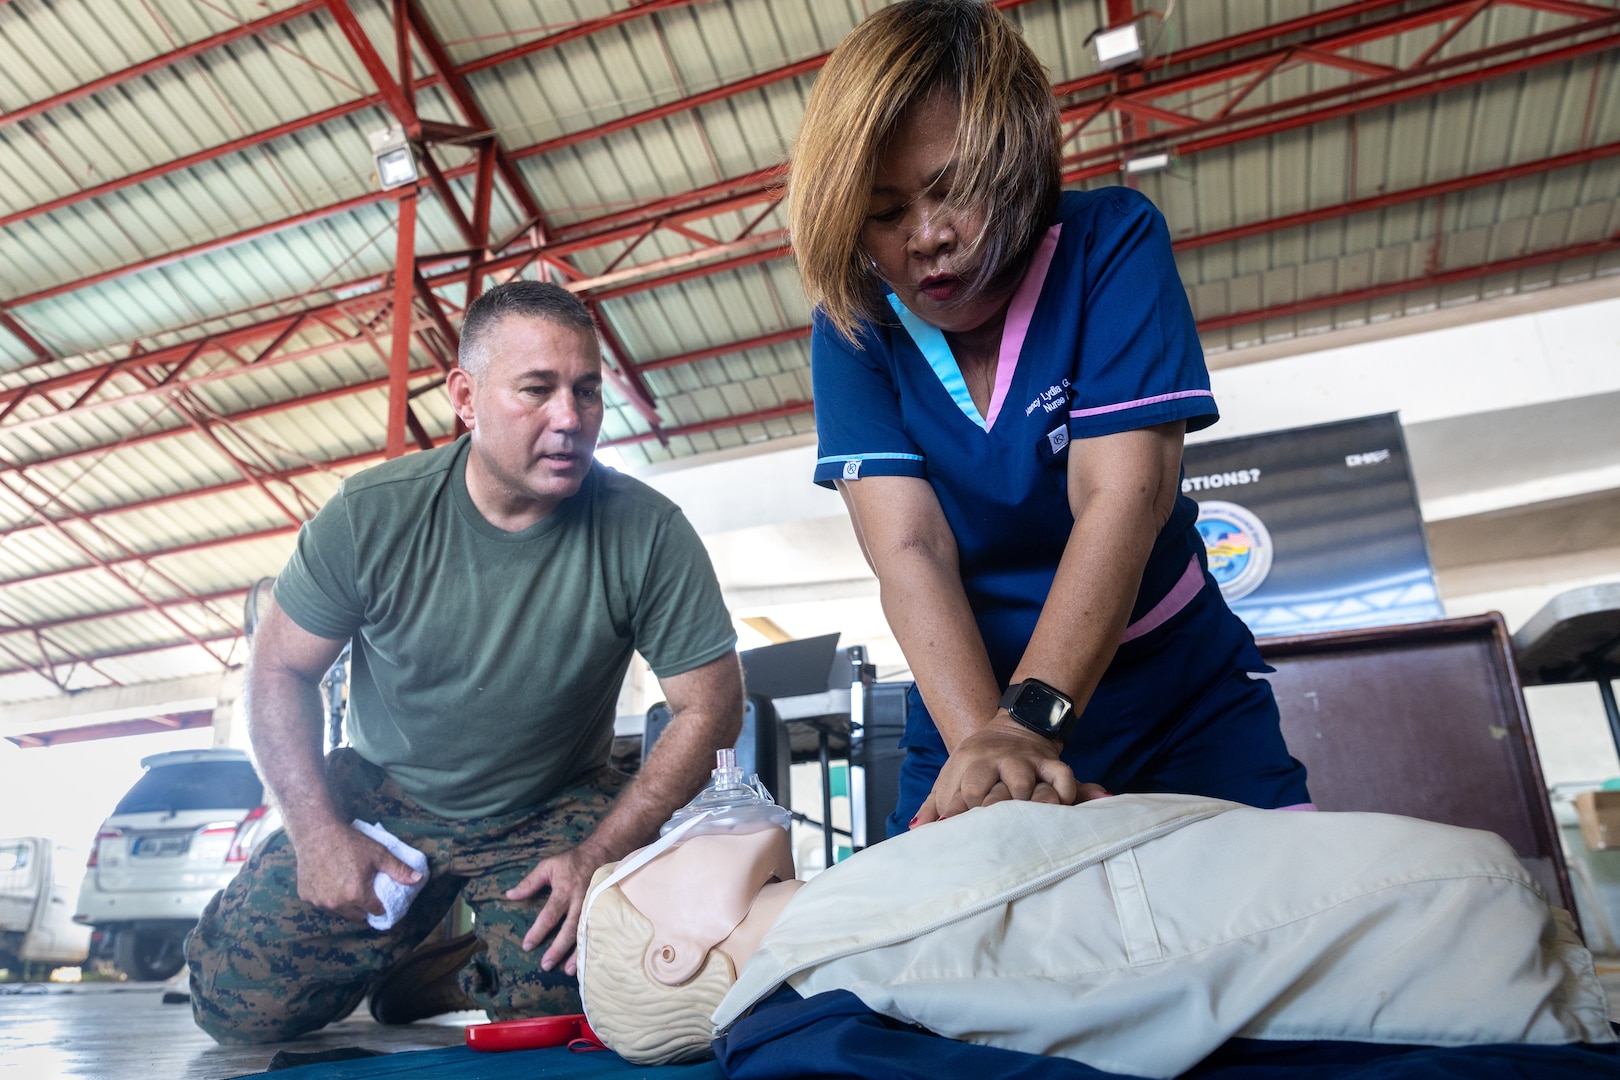 U.S. Navy Petty Officer 1st Class Ron Williams, a corpsman with the Combined Joint Civil-Military Operations Task Force, guides a local healthcare worker during a cardiopulmonary resuscitation practical application as part of a community health engagement held before Exercise Balikatan 24 at Davila Elementary School in Pasuquin, Ilocos Norte, Philippines, April 21, 2024. The Philippine and U.S. service members trained Ilocos Norte healthcare workers and residents on basic lifesaving skills such as cardiopulmonary resuscitation and tactical combat casualty care, increasing emergency care access and awareness. BK 24 is an annual exercise between the Armed Forces of the Philippines and the U.S. military designed to strengthen bilateral interoperability, capabilities, trust, and cooperation built over decades of shared experiences. (U.S. Marine Corps photo by Cpl. Trent A. Henry)